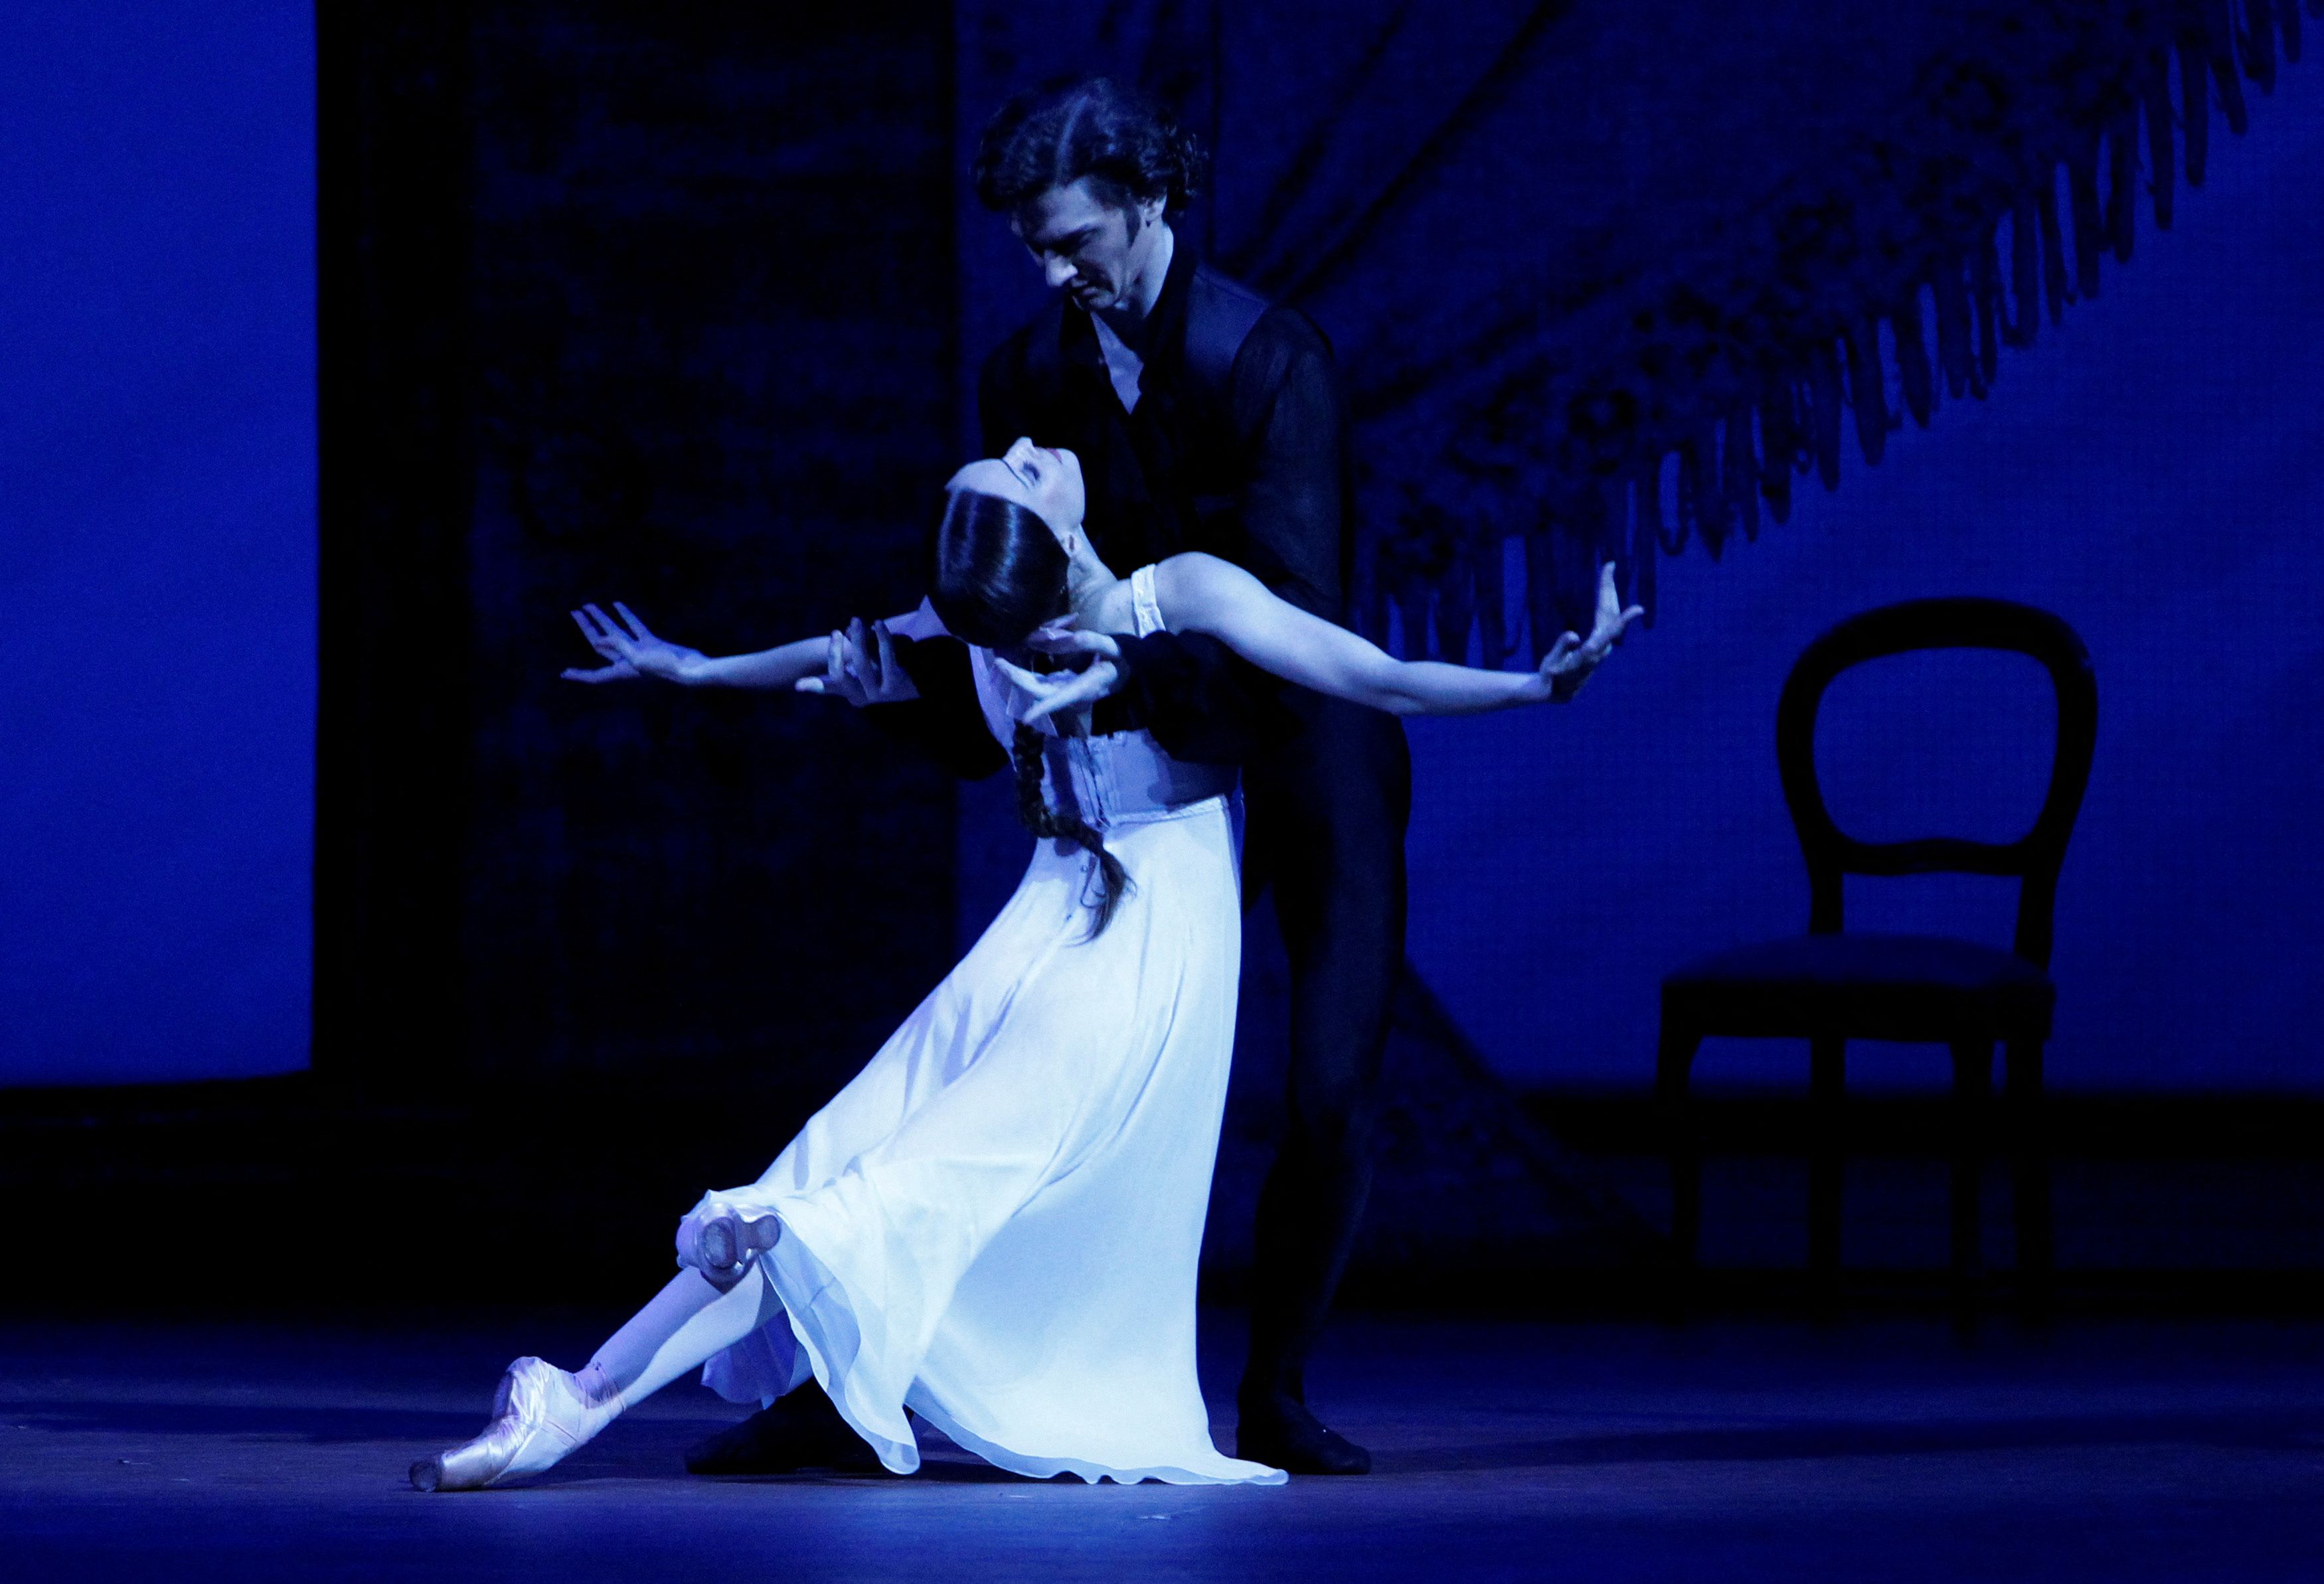 Dancers Olga Smirnova in the role of Tatyana and Vladislav Lantratov in the role of Onegin perform during a media preview of the ballet 